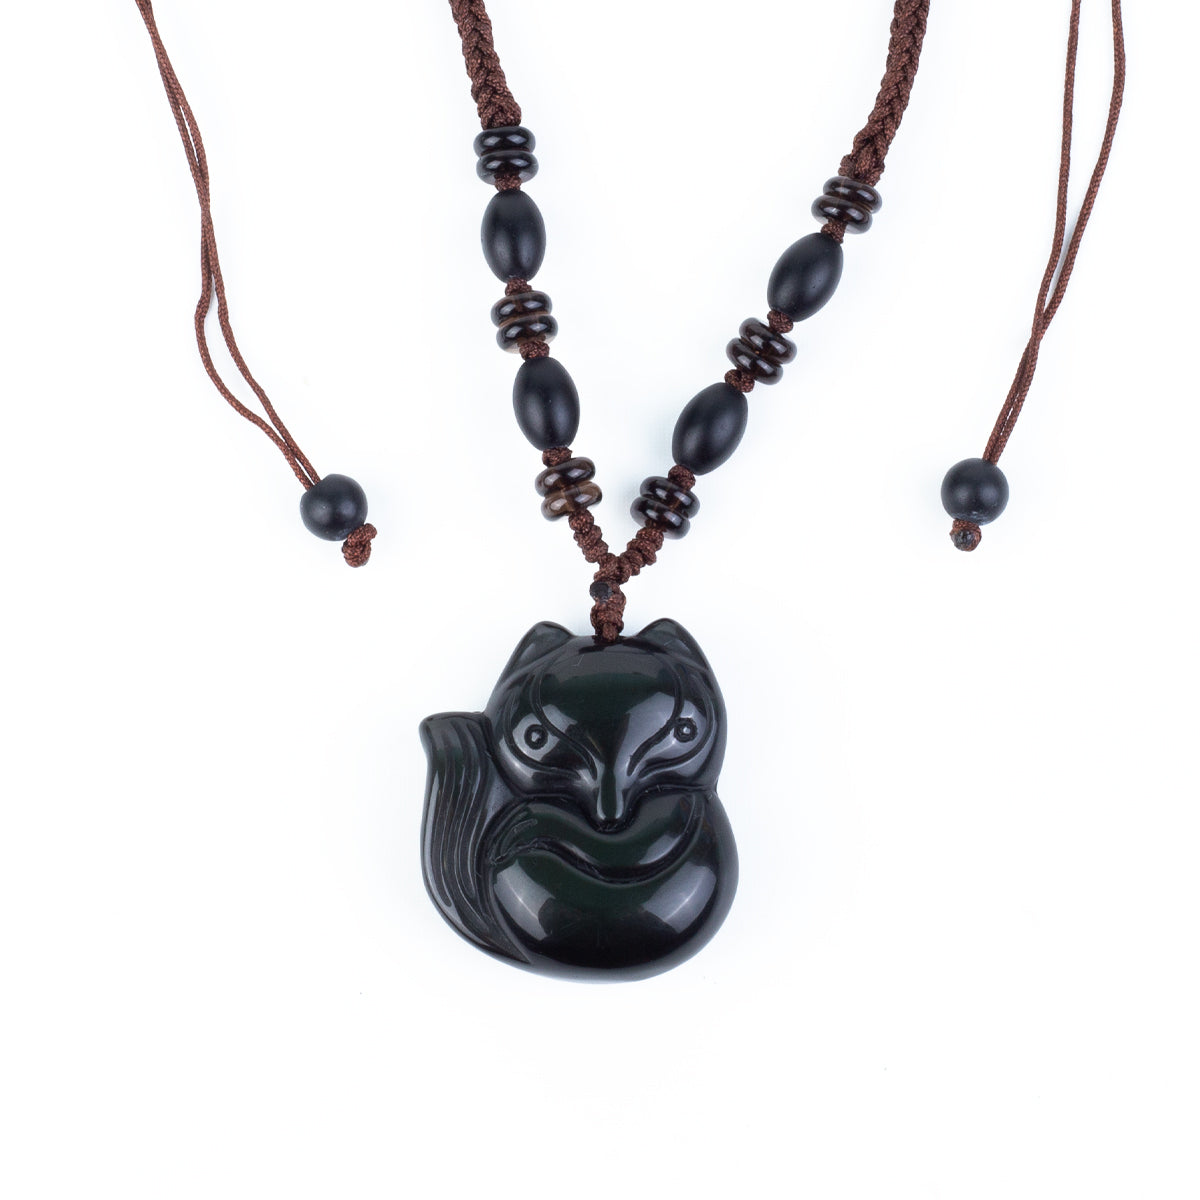 Thera Crystals® Black Obsdian Necklace